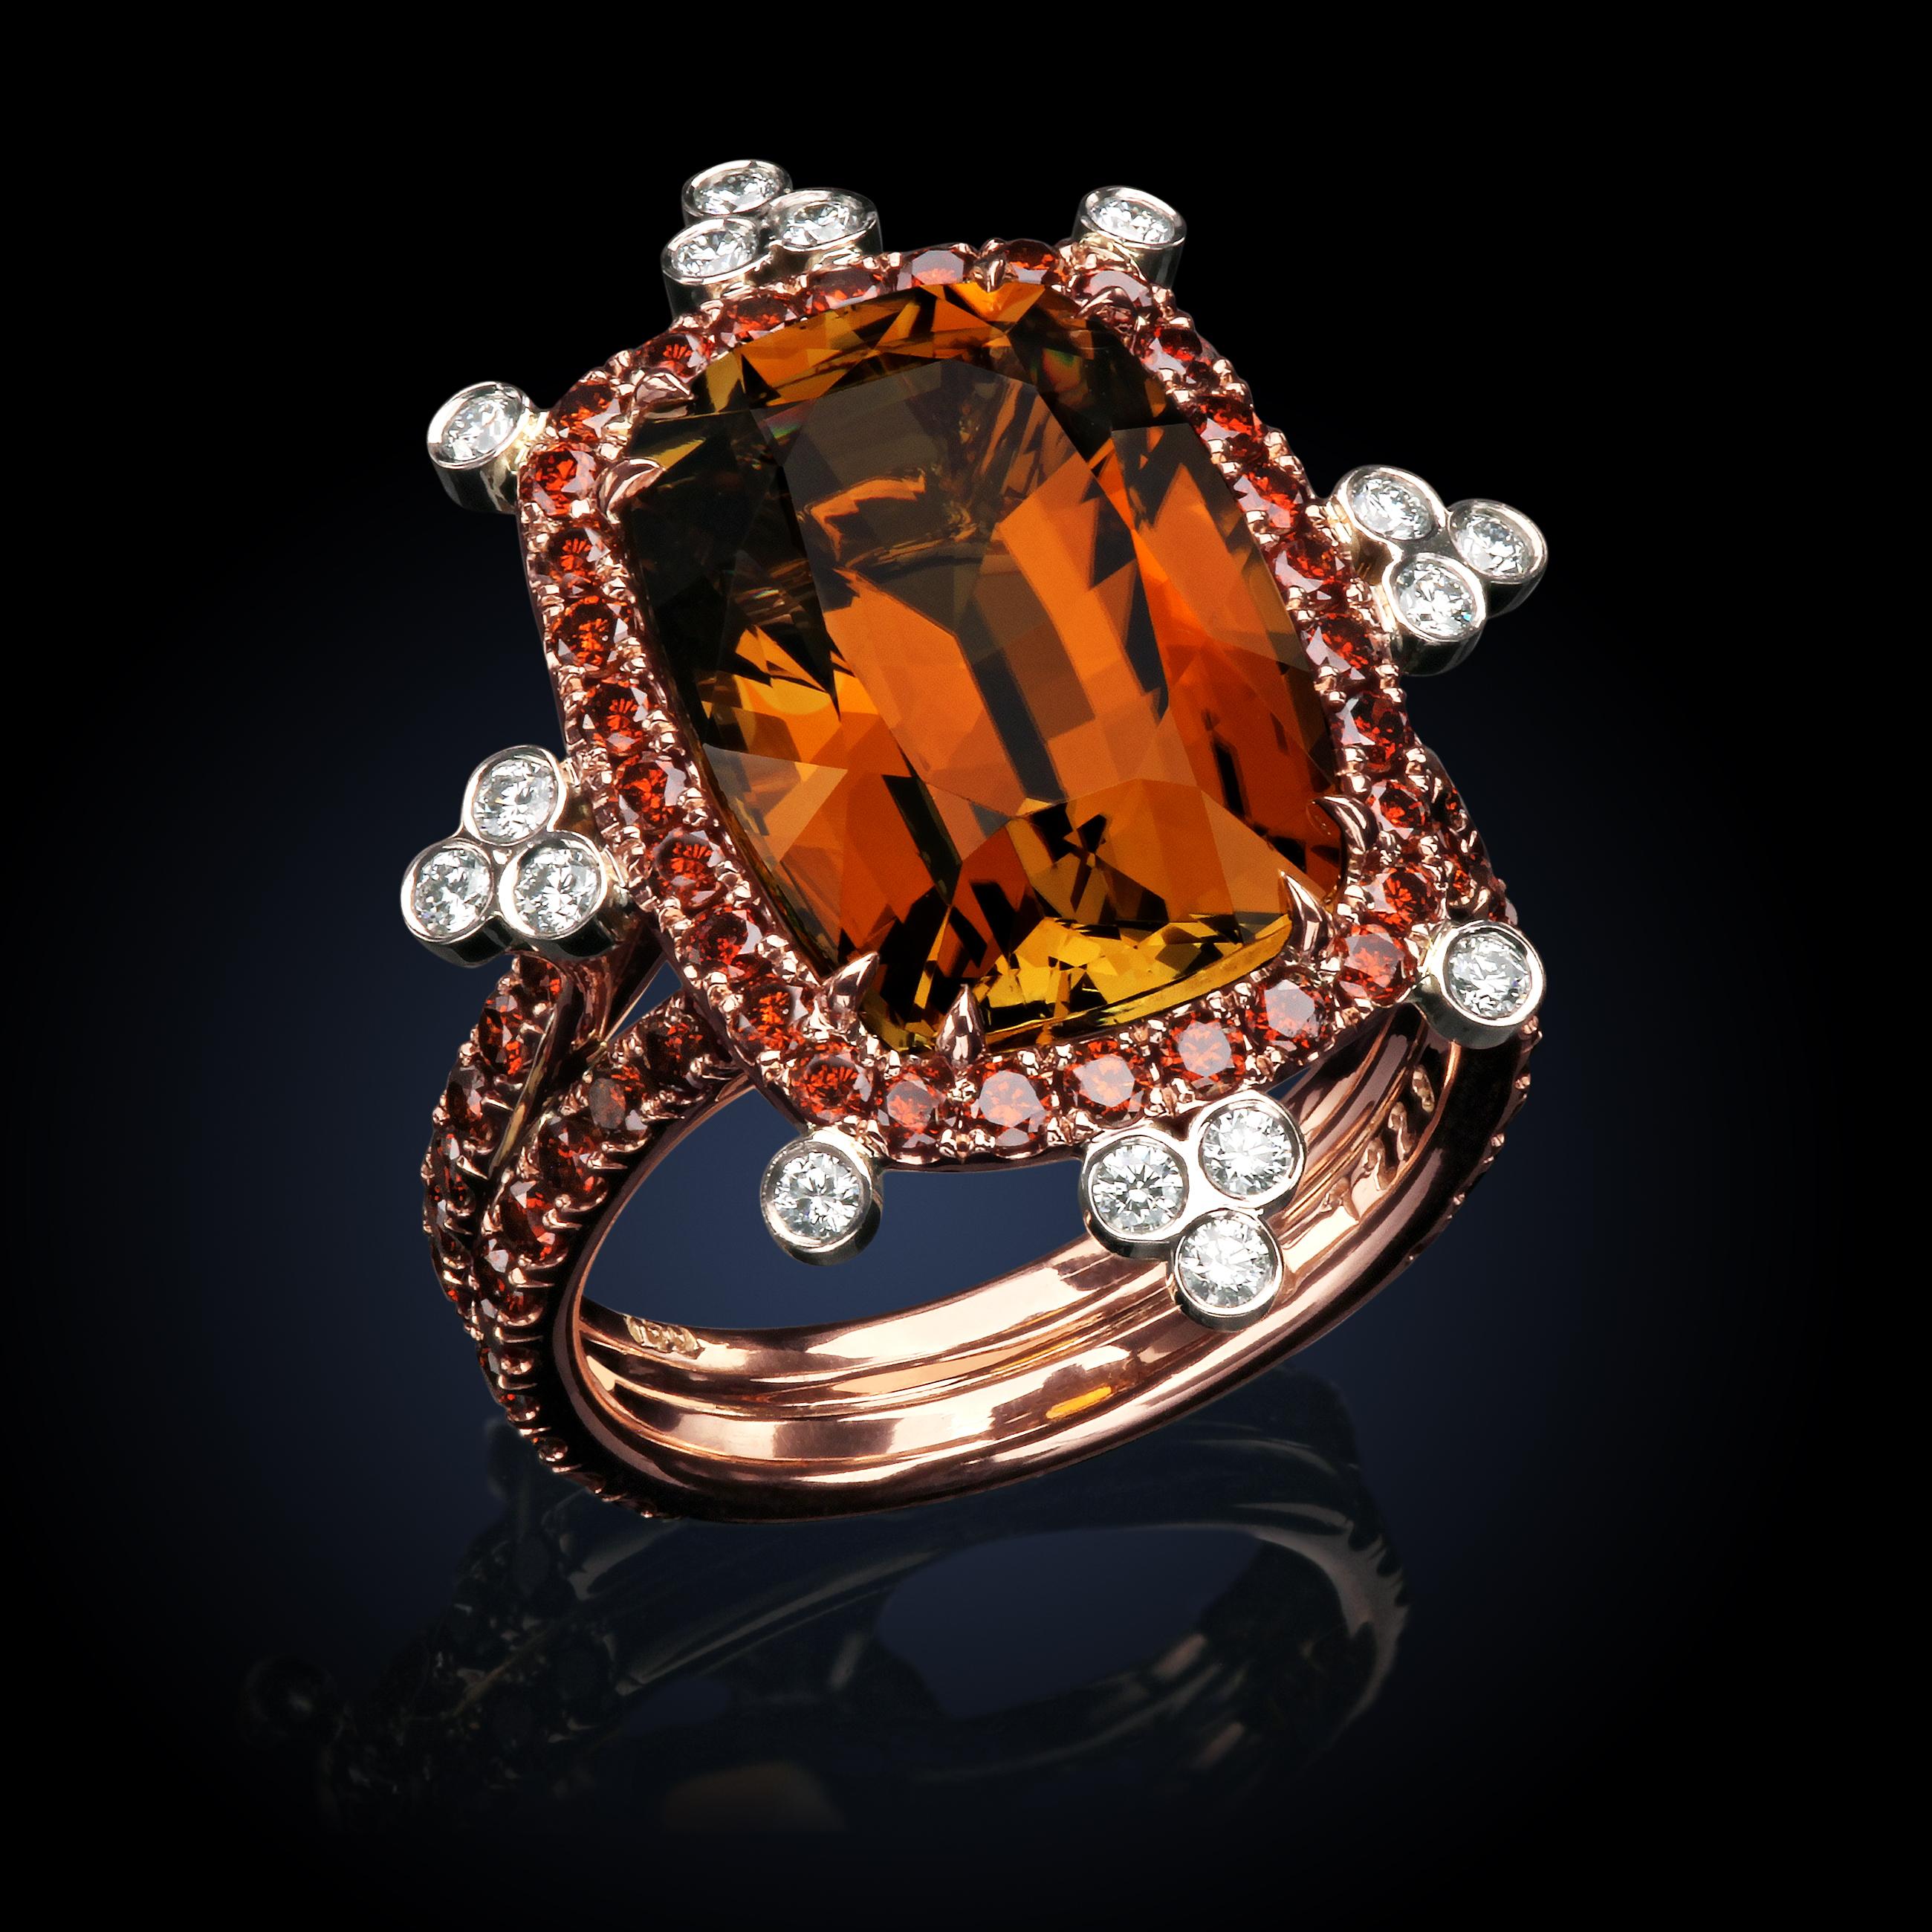 Richly decorated and set with 8.53-carat natural 